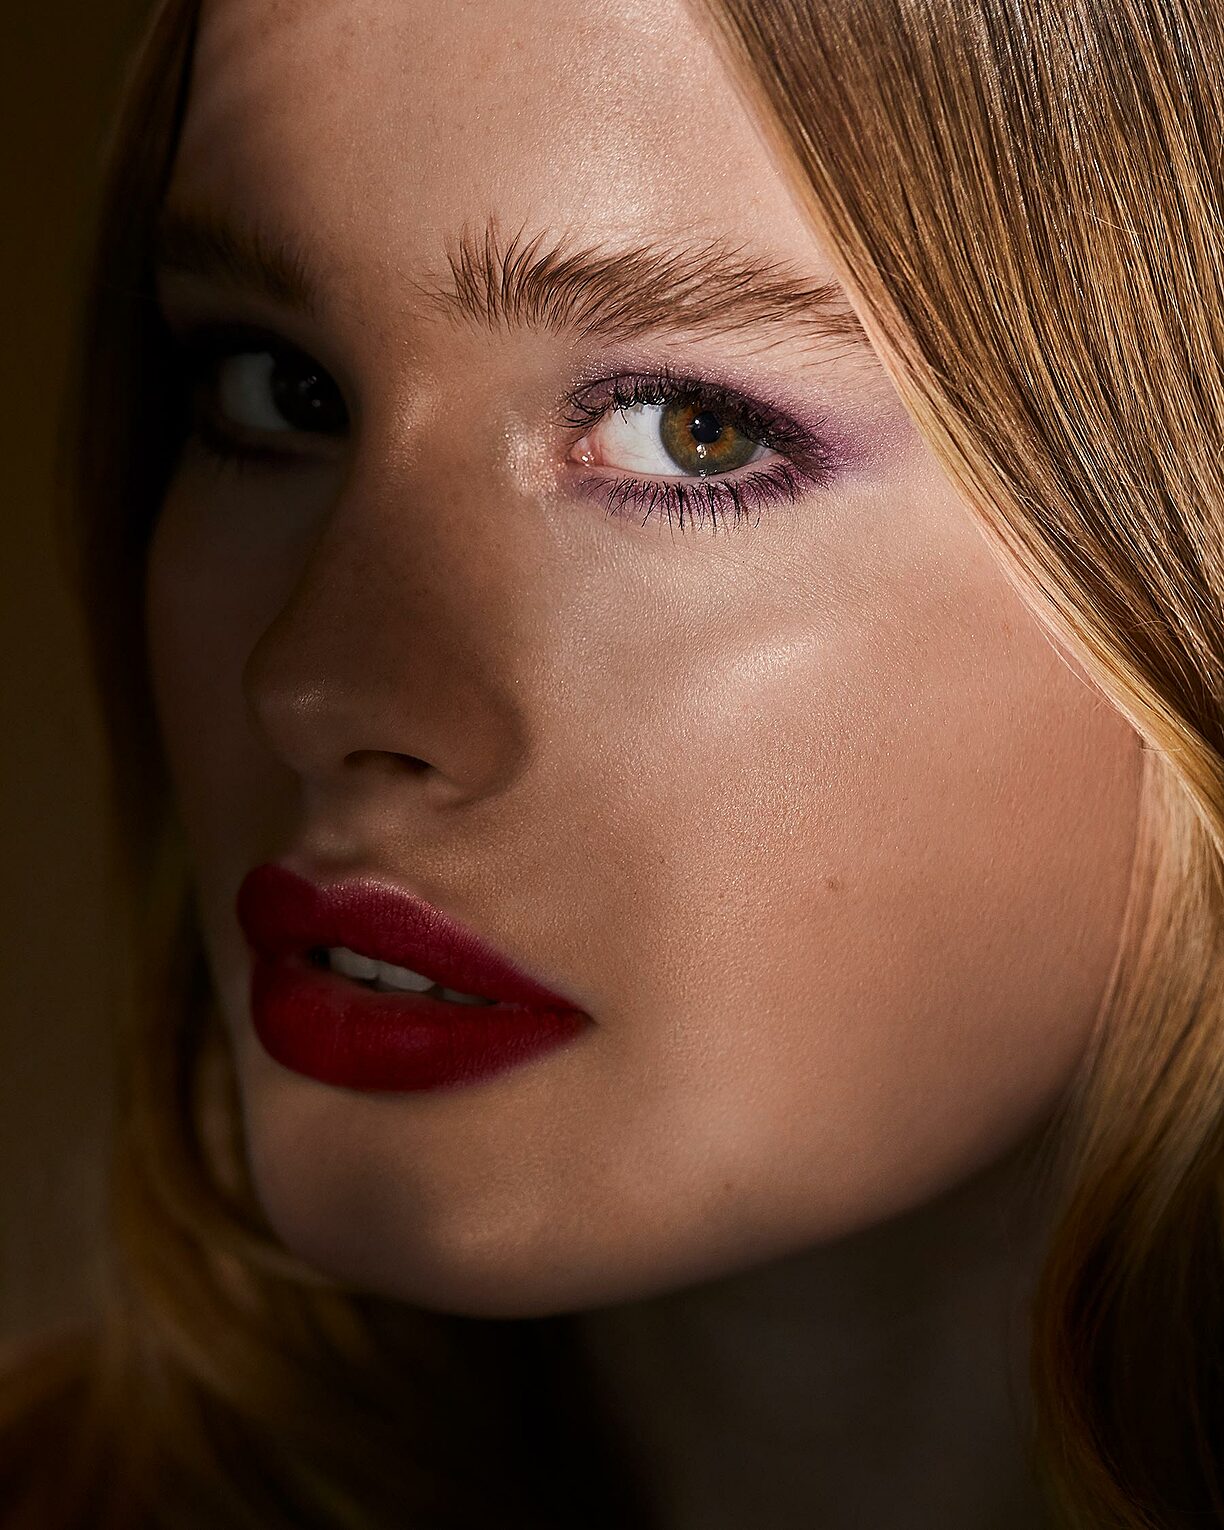 A beauty close-up with a blonde model. She wears red lips and a light purple eye shadow. A shadow is around her nose